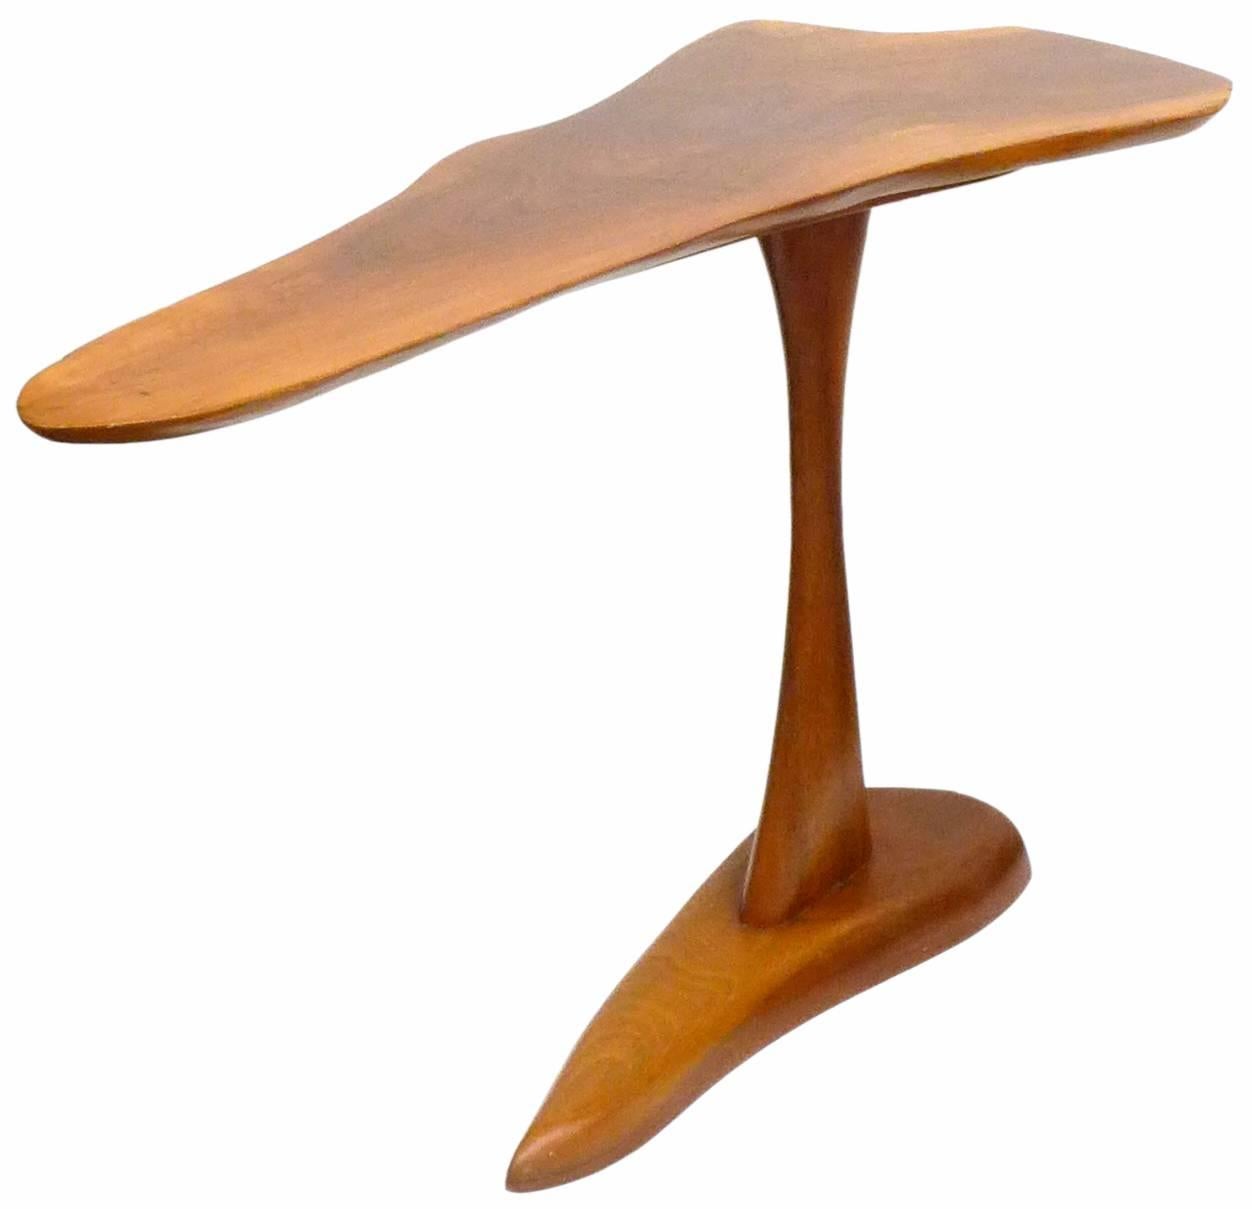 An elegant and unusual organic wood side table. A stunning, slight form, a top with fully free-edge perimeter sitting upon a gracefully tapering stem and top-mimicking base. A deep, honey hue with wonderful woodgrain revealed throughout. Signed